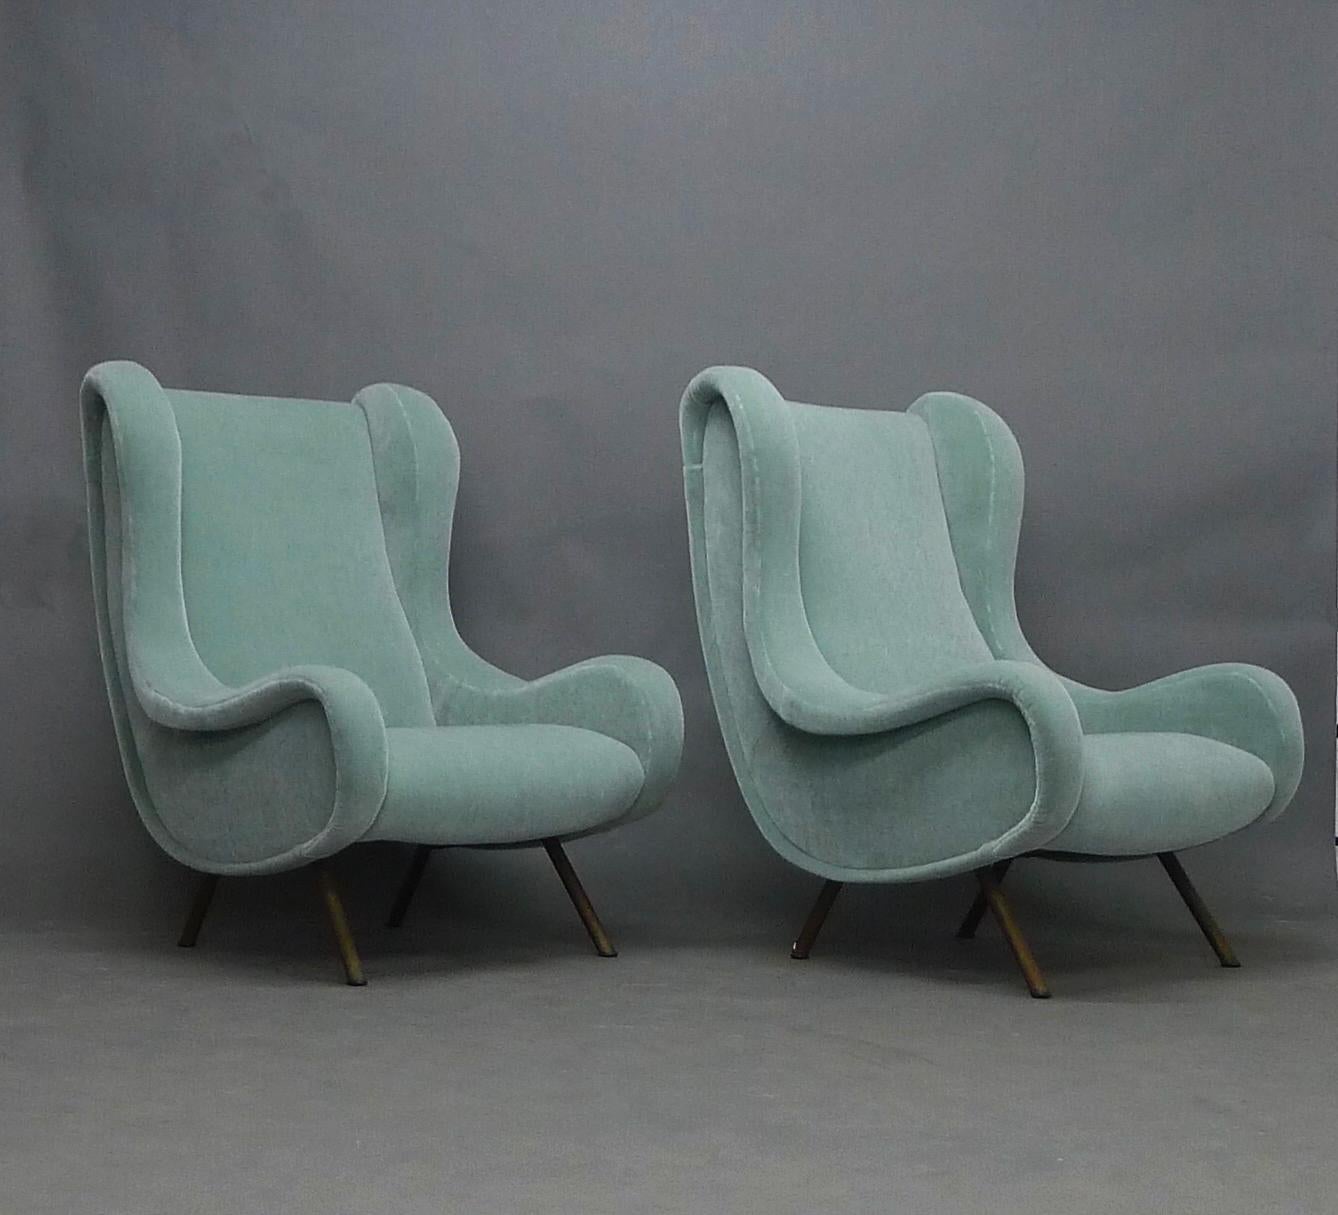 Marco Zanuso, Pair of Senior Chairs, 1950s and matching pair of ottomans For Sale 7